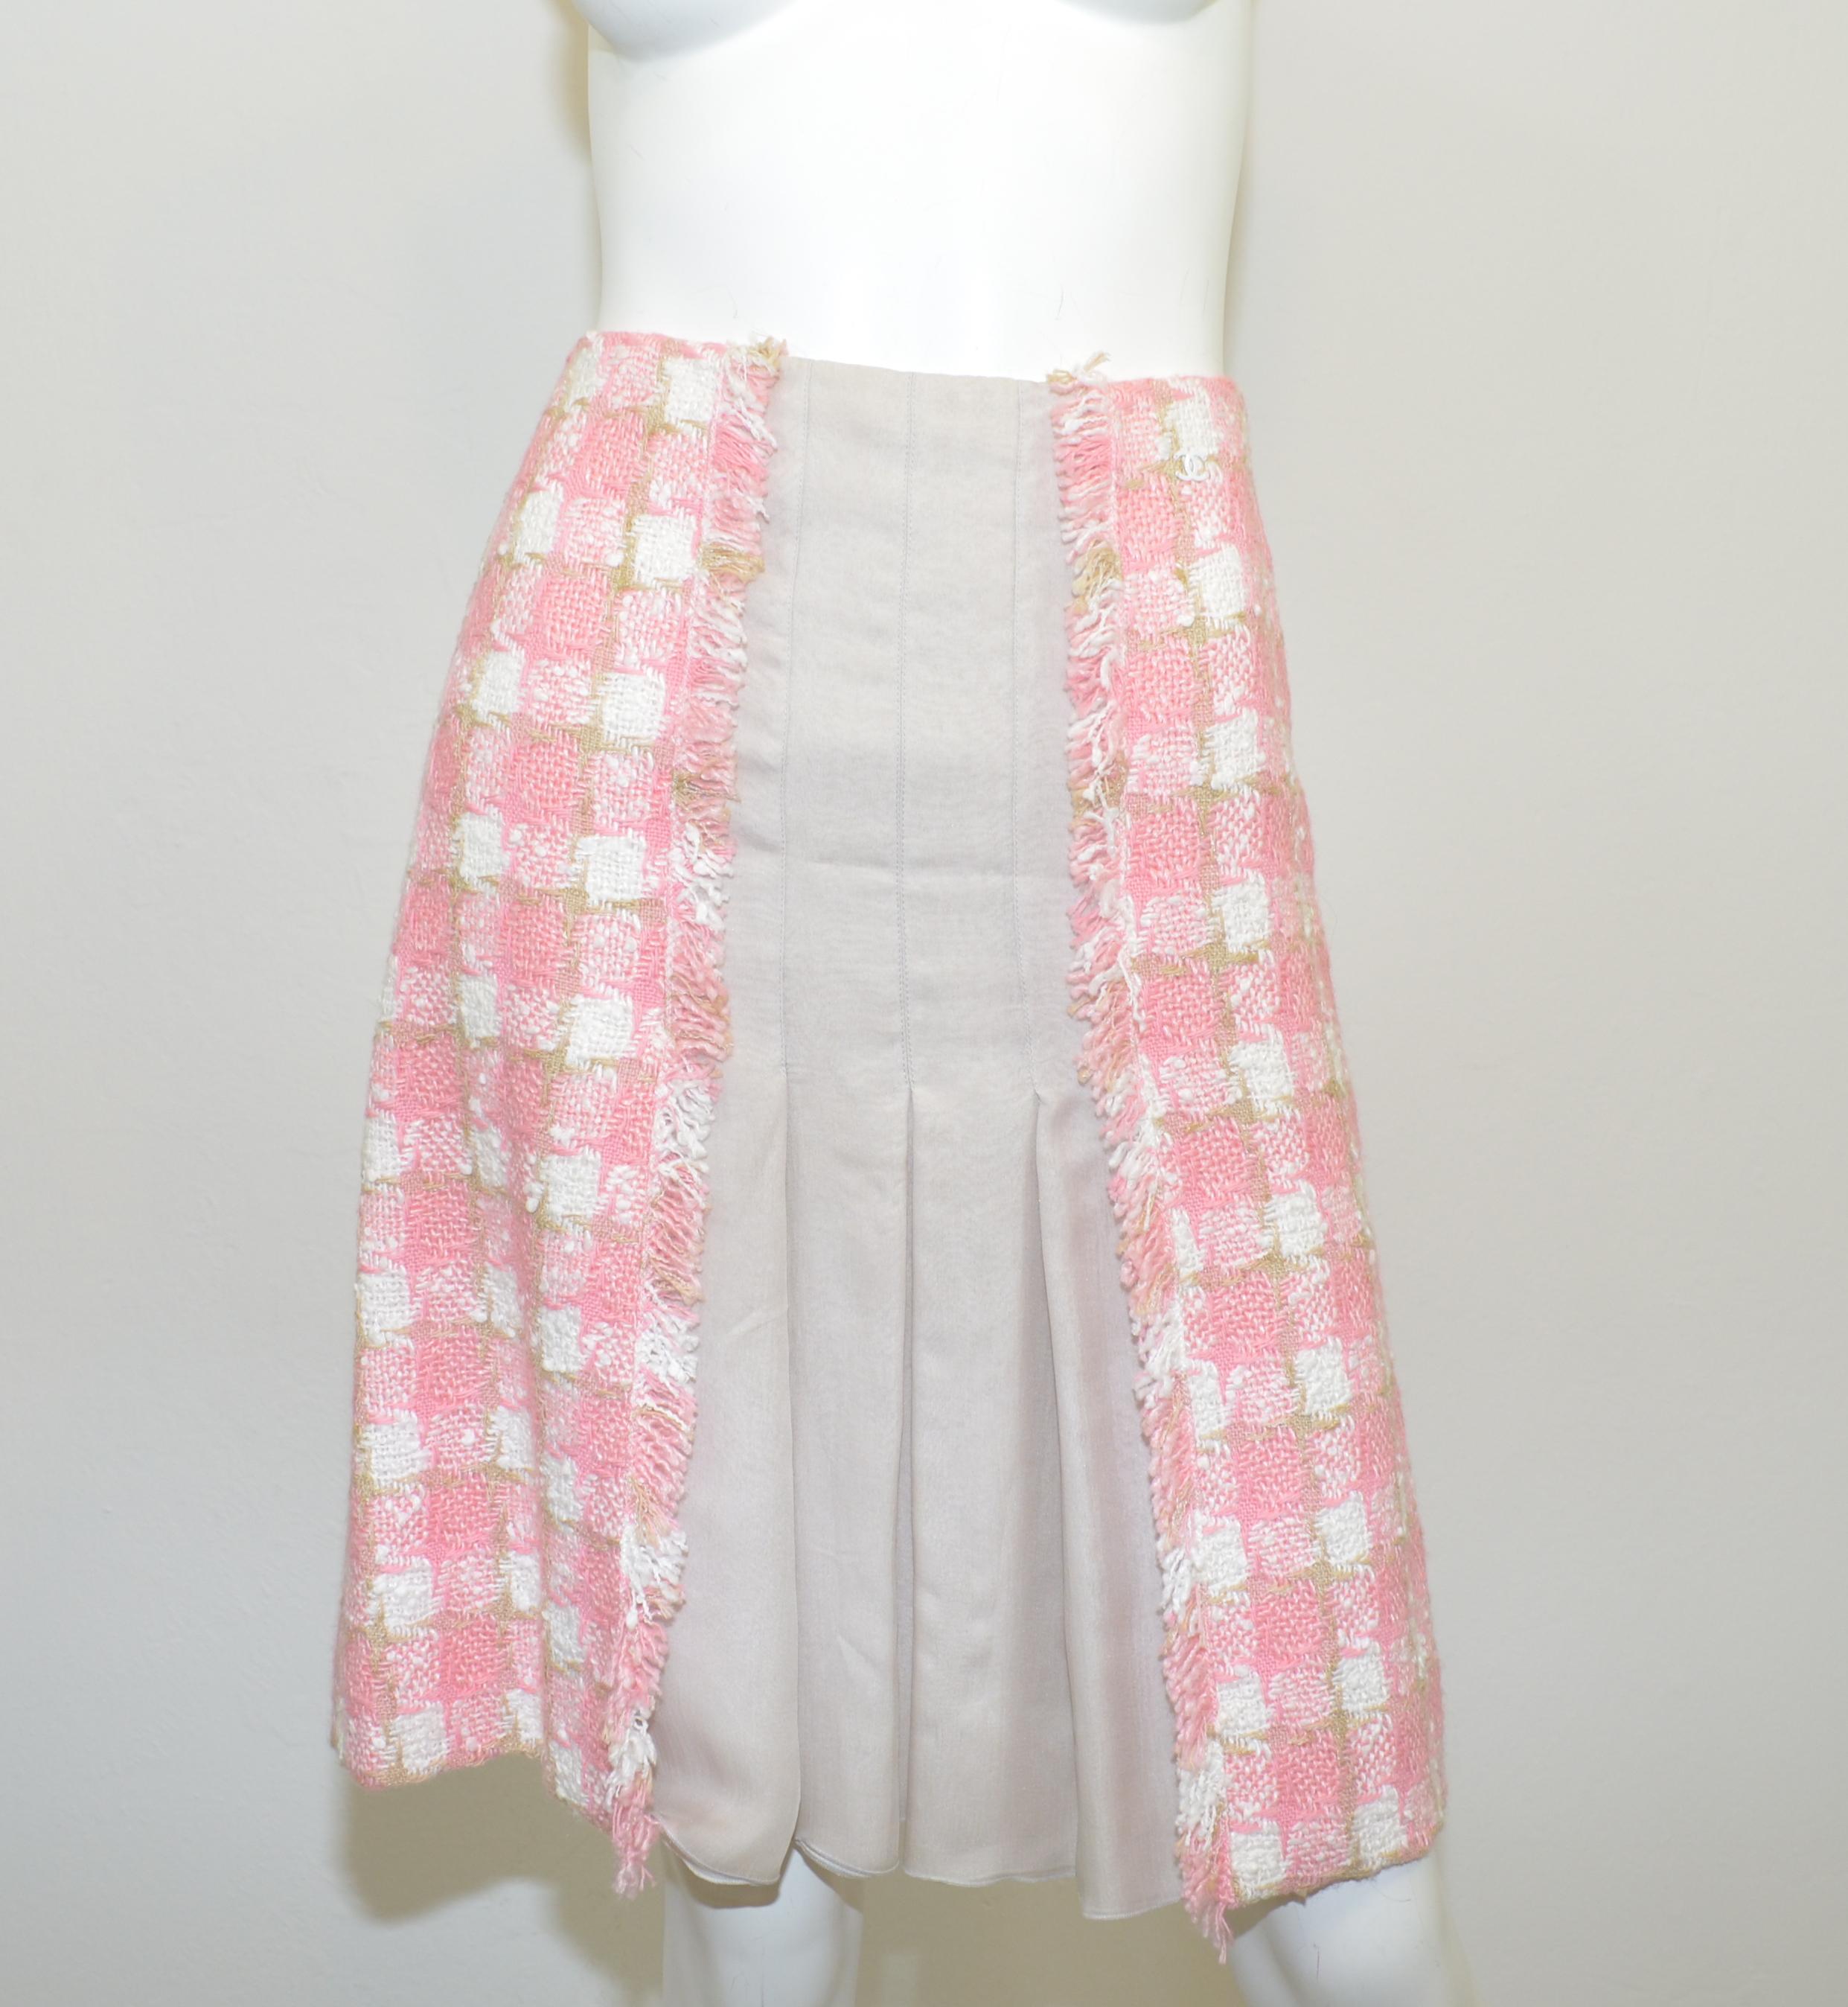 Women's Chanel Pink, Beige Tweed Knit Skirt and Jacket Set with Chiffon Trim